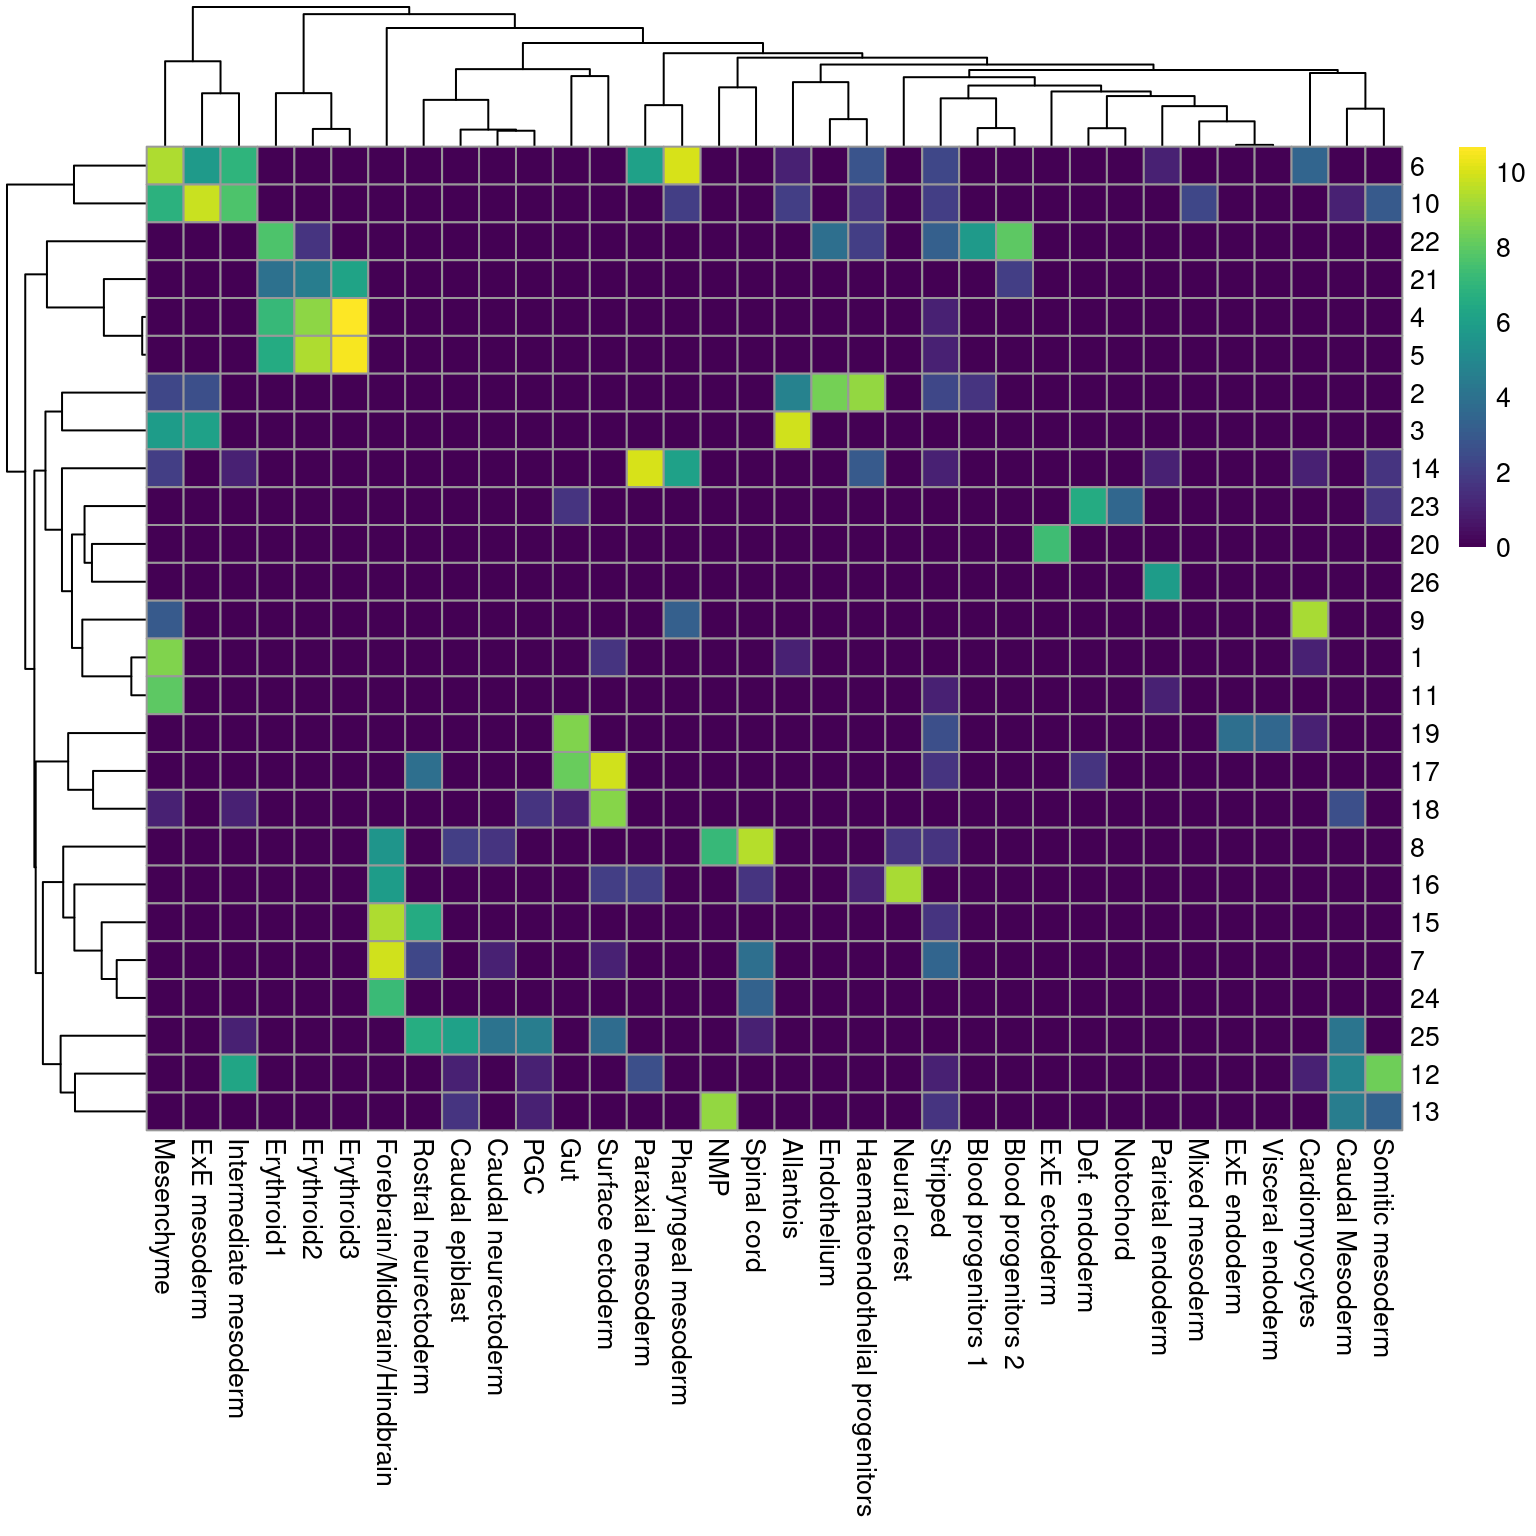 Heatmap showing the abundance of cells with each combination of cluster (row) and cell type label (column). The color scale represents the log~2~-count for each combination.